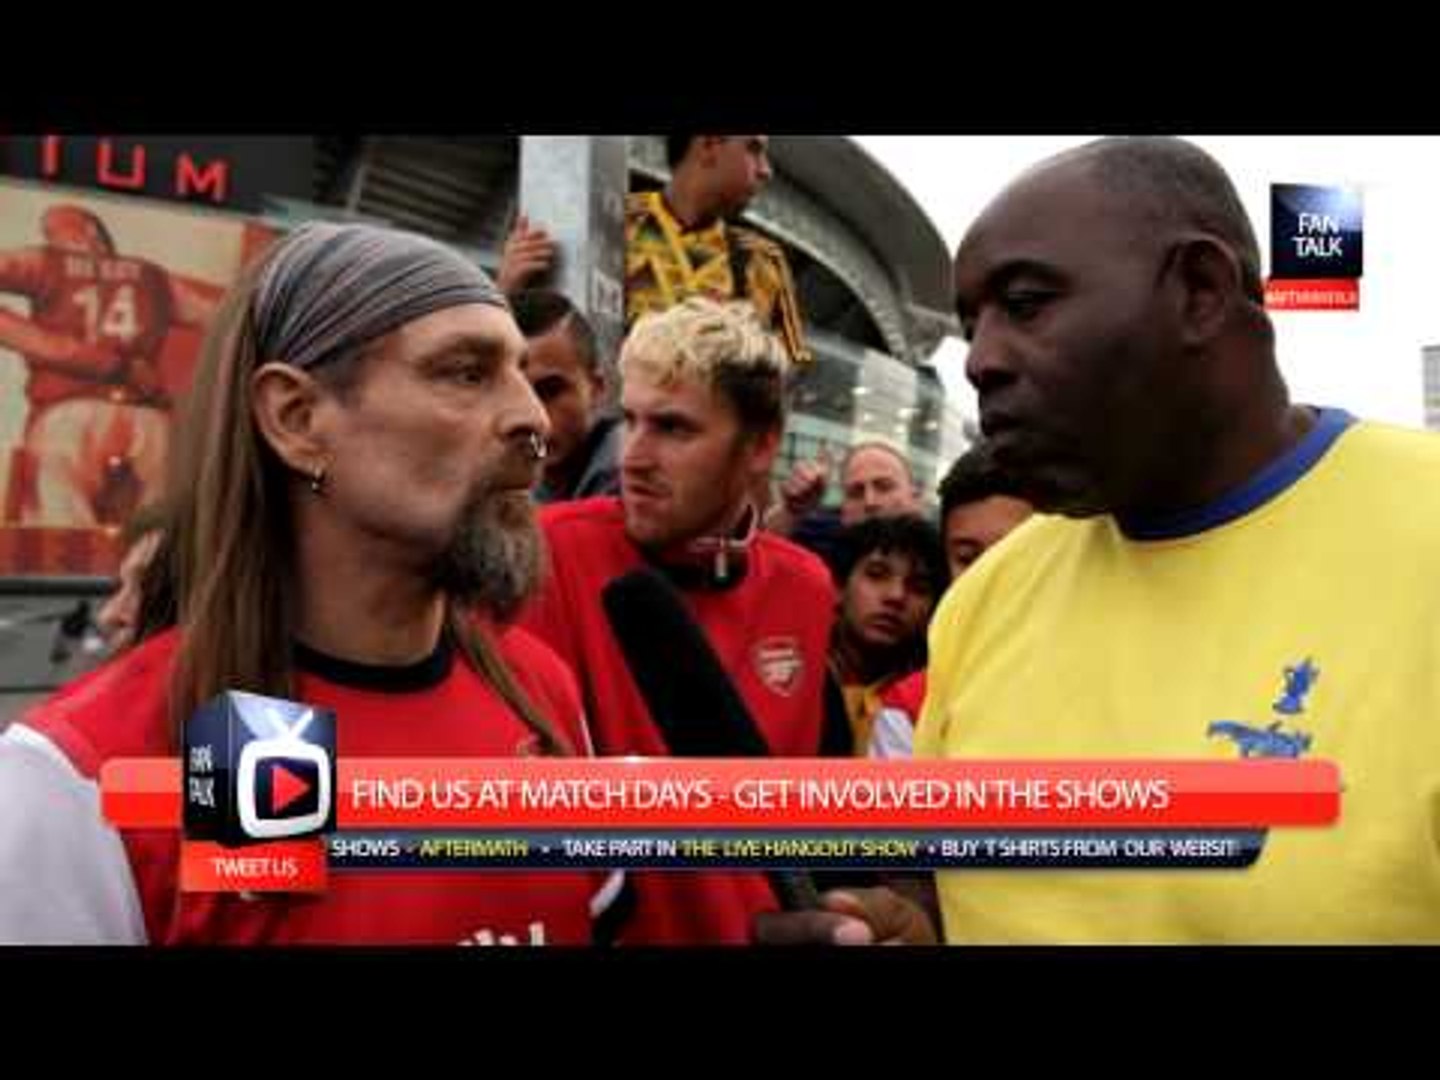 Arsenal FC 1 Spurs 0 - Bully leads the songs after win over Spurs - FanTalk - - ArsenalFanTV